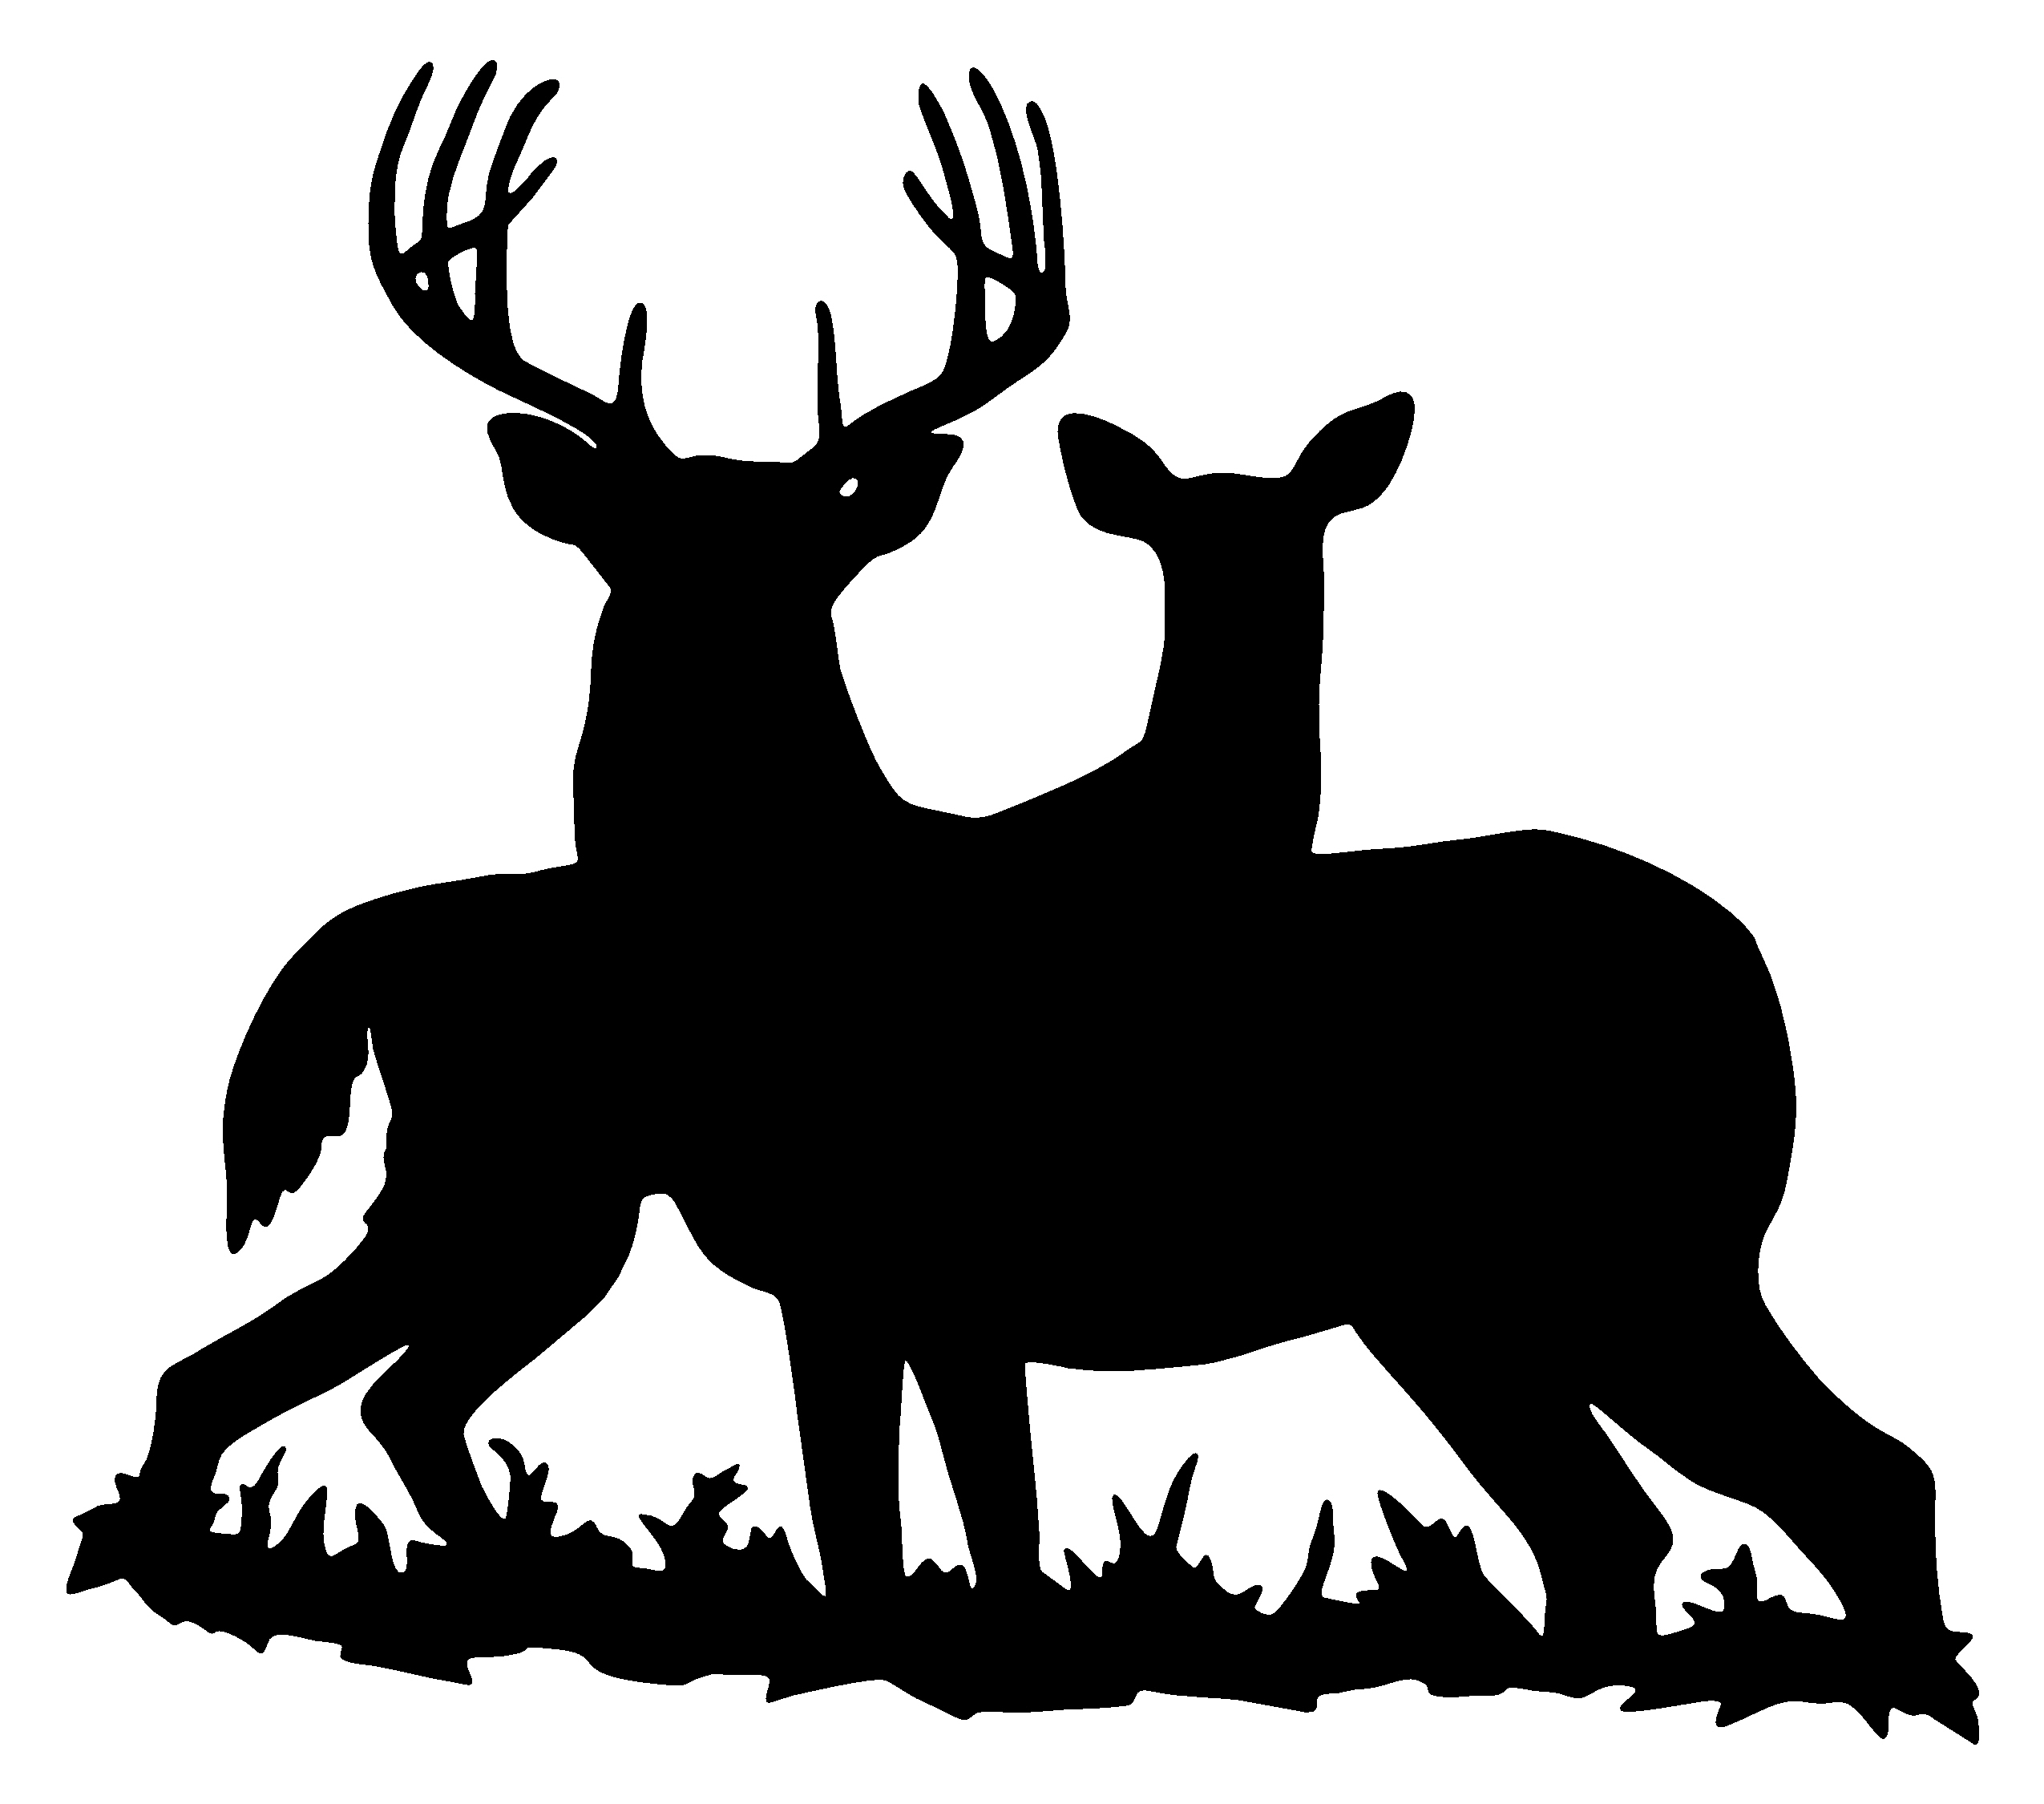 Deer in the woods clipart silhouette